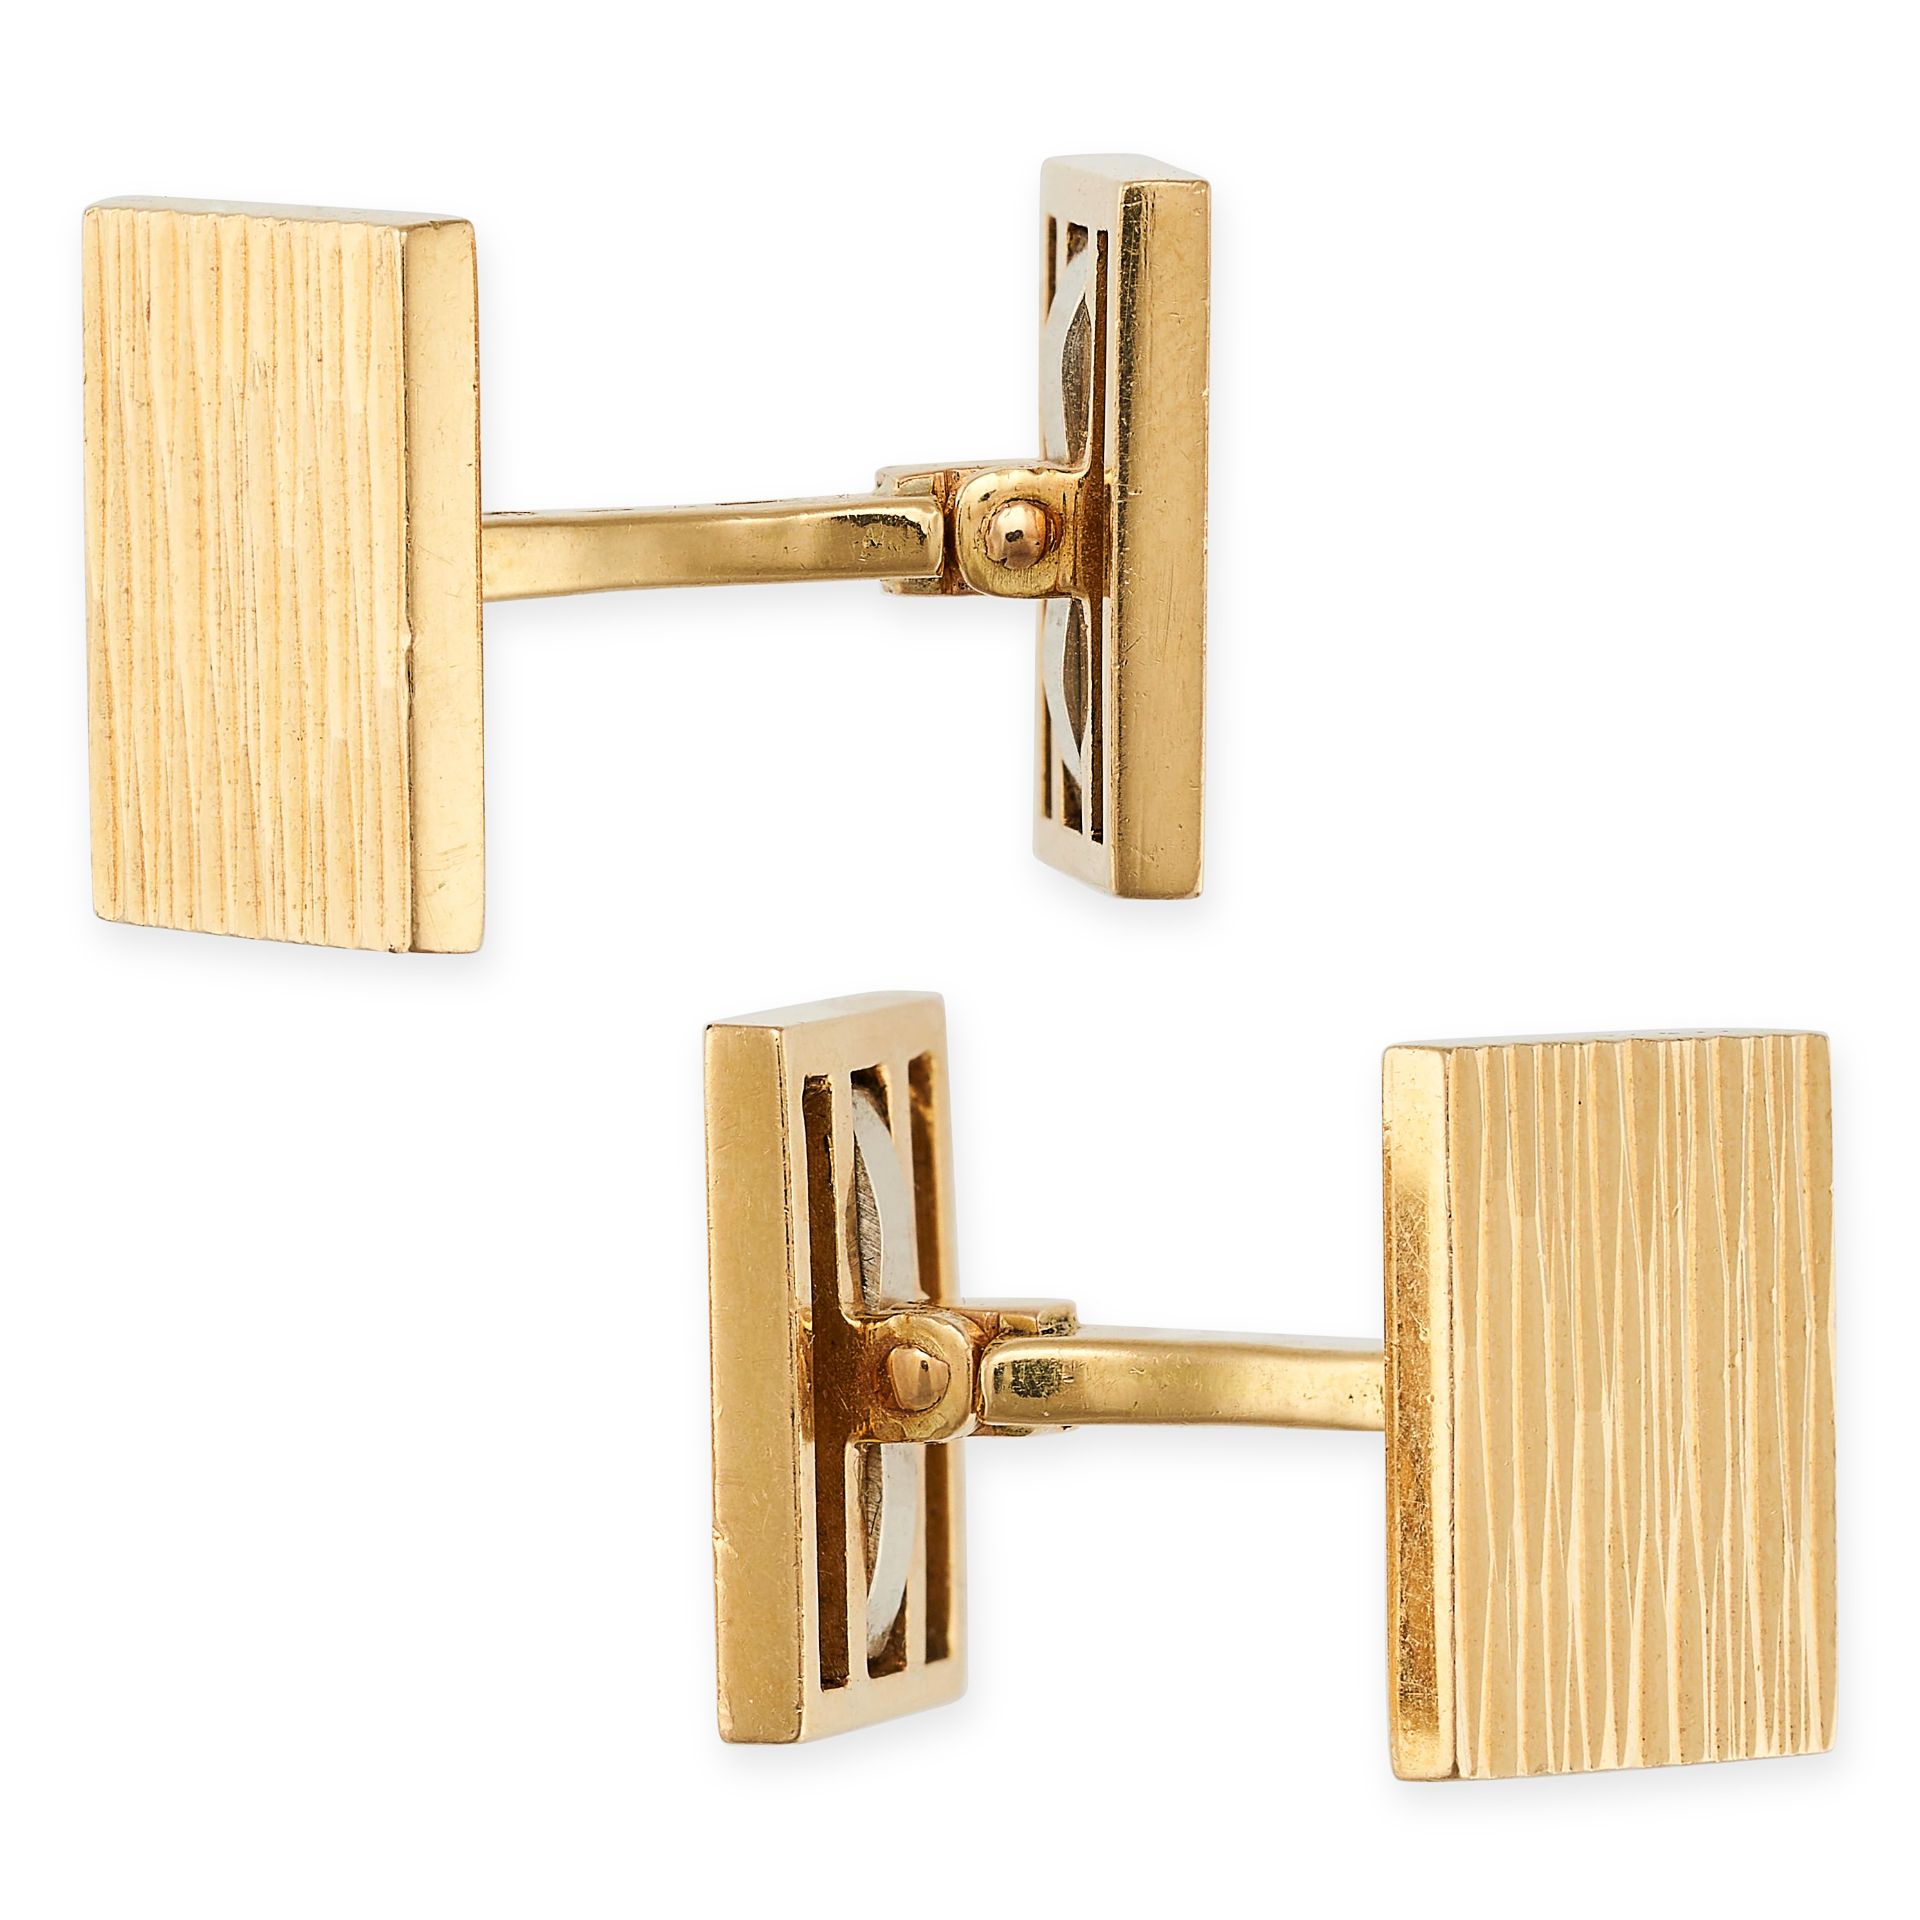 VAN CLEEF & ARPELS, A PAIR OF VINTAGE CUFFLINKS in 18ct yellow gold, each cufflink with two textu...